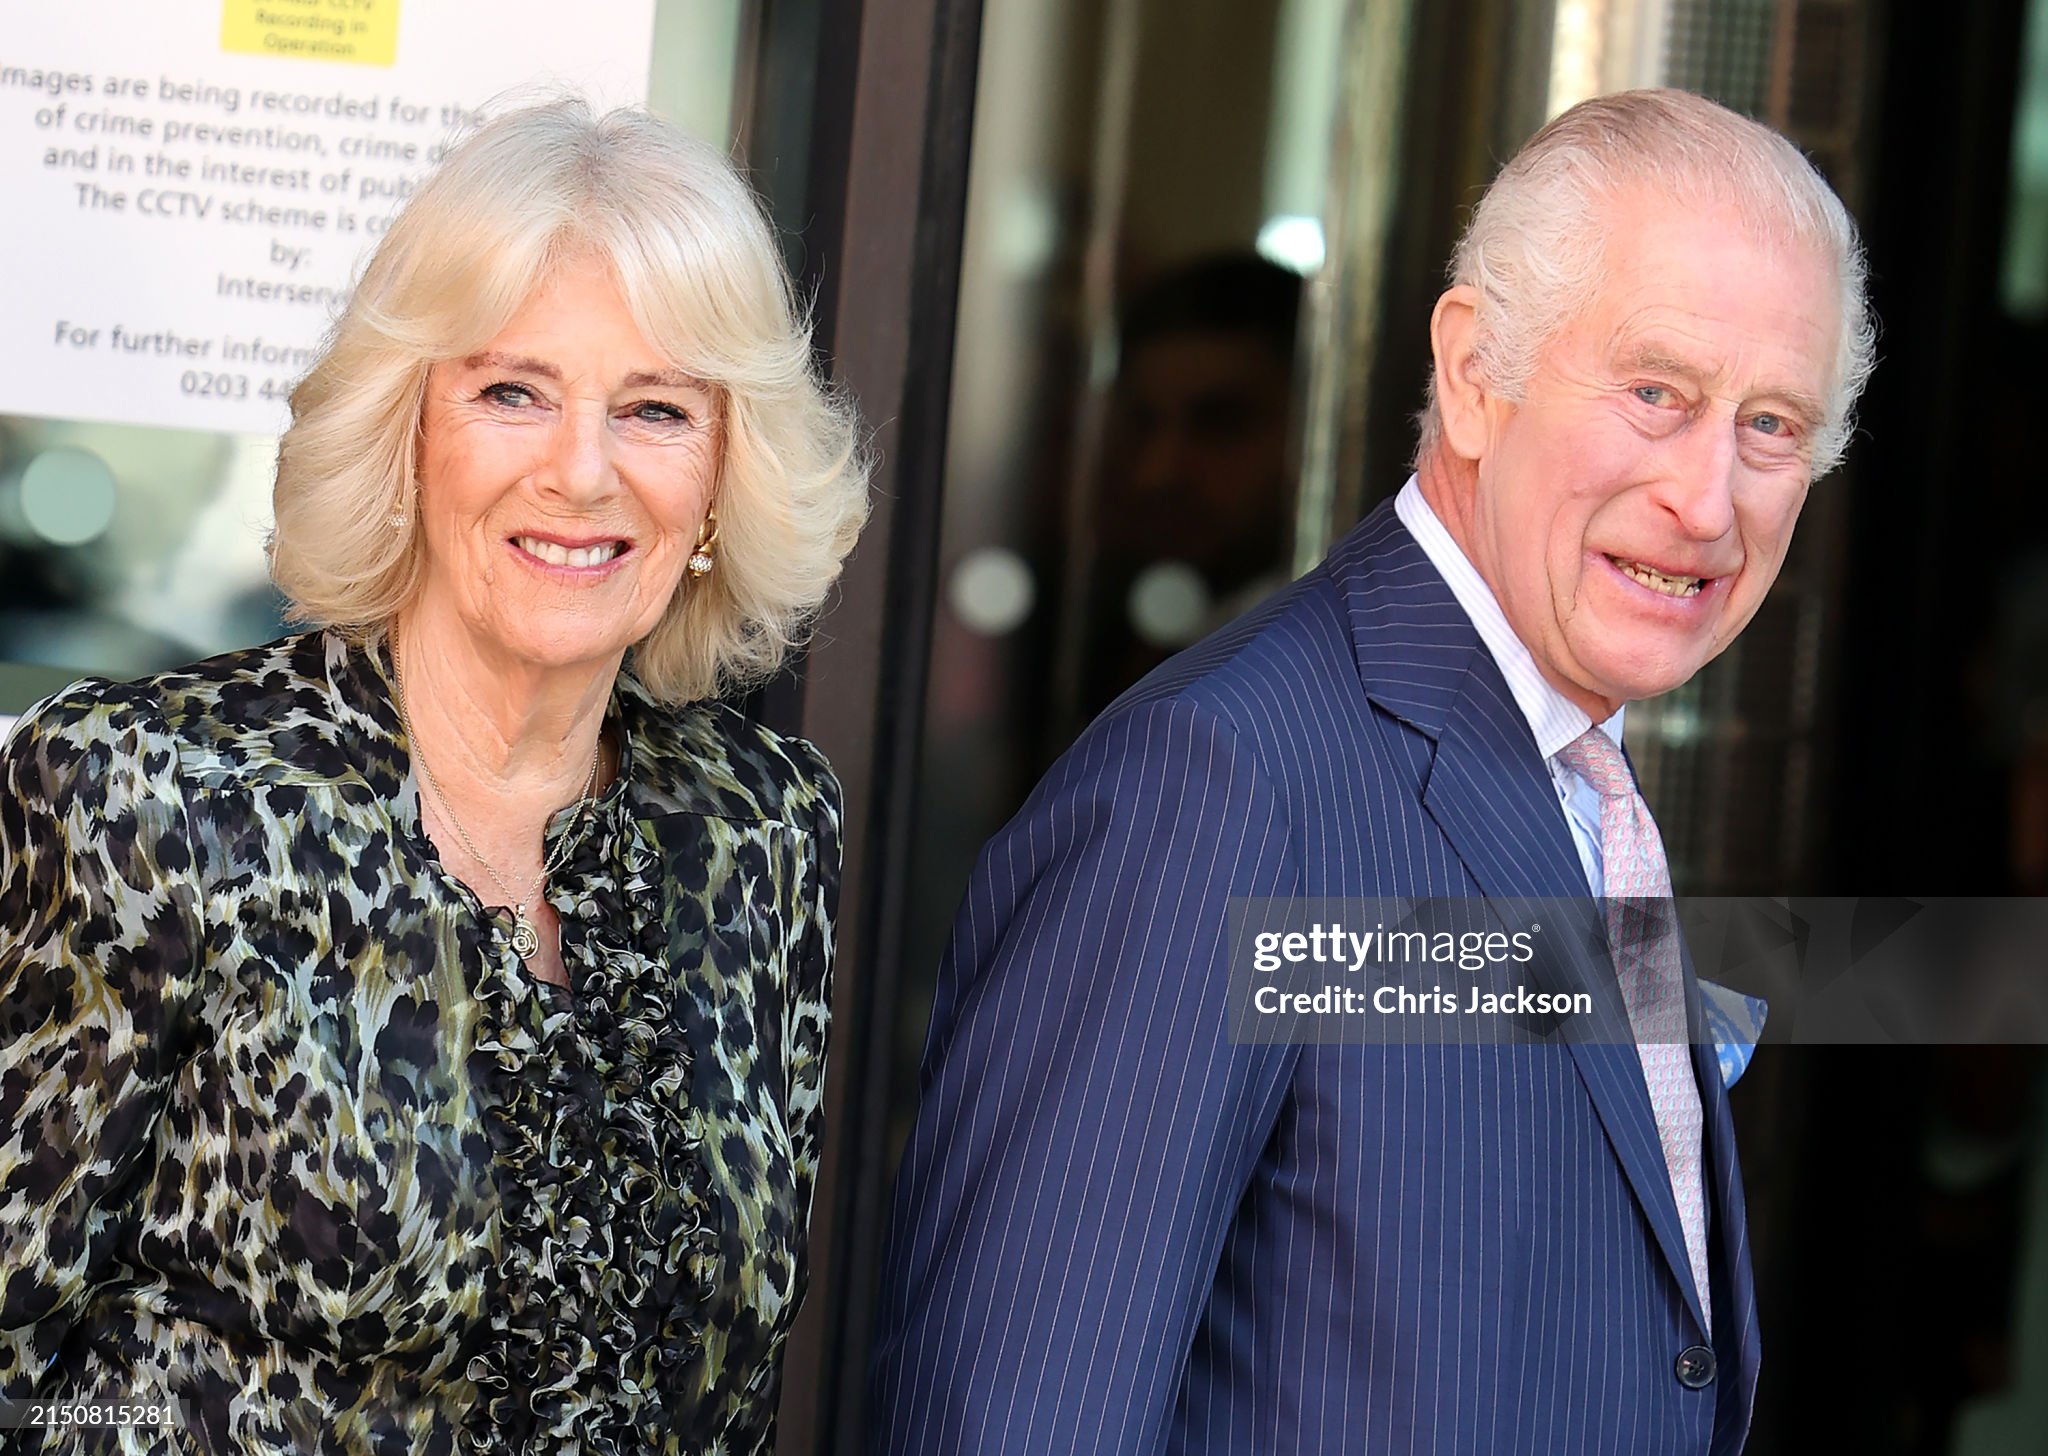 king-charles-iii-and-queen-camilla-visit-university-college-hospital-macmillan-cancer-centre.jpg?s=2048x2048&w=gi&k=20&c=0RqLr78KF8Qh-1-LR0wl86jF22awbzyFST7B_2OlU64=